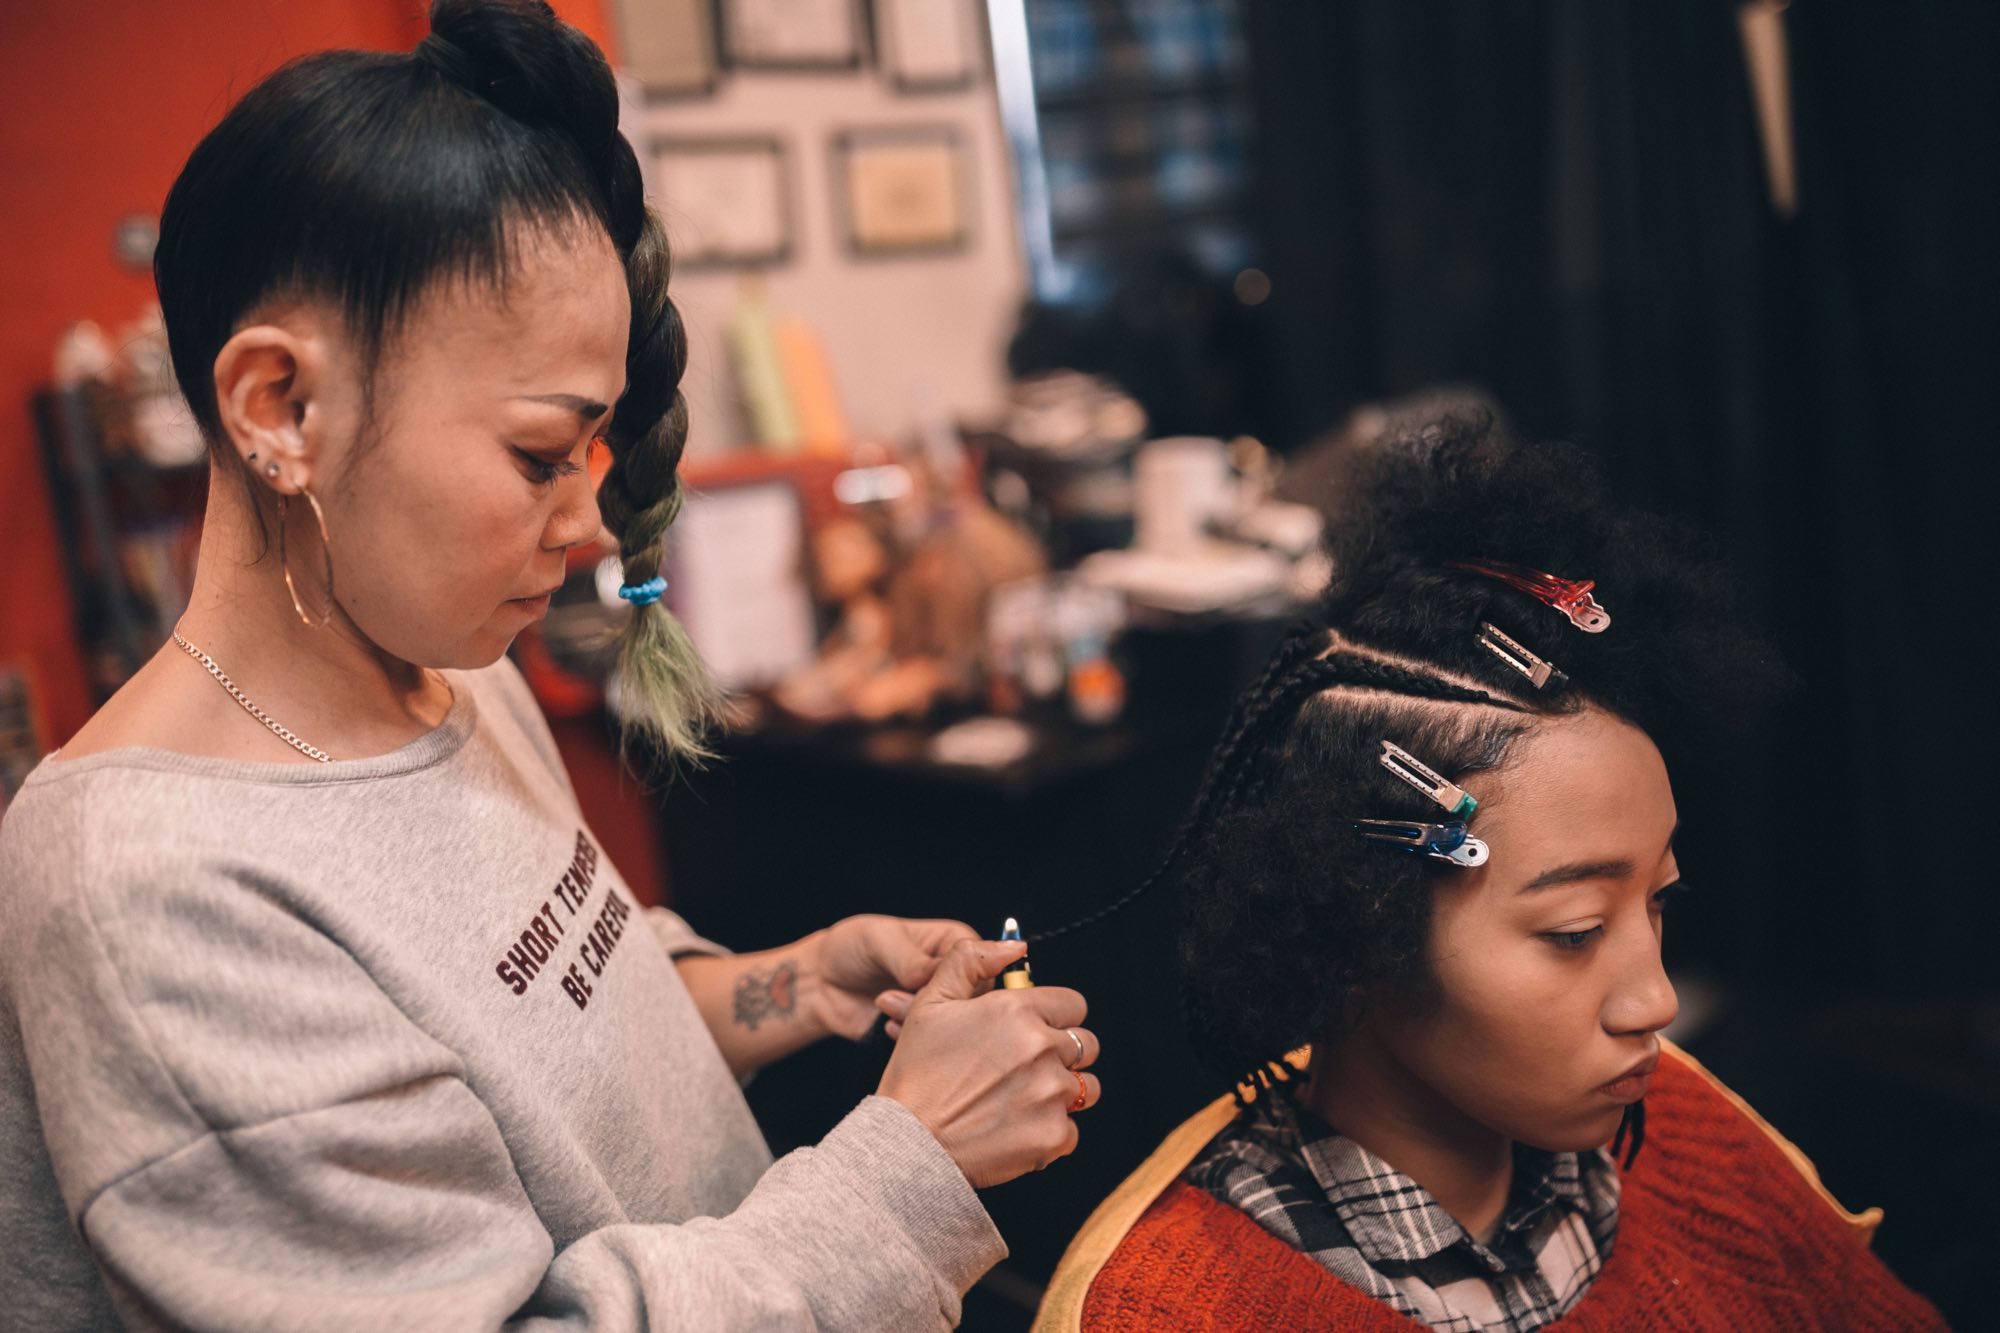 Afro-textured hair in Japan: Decolonizing the Afro - Japan Today